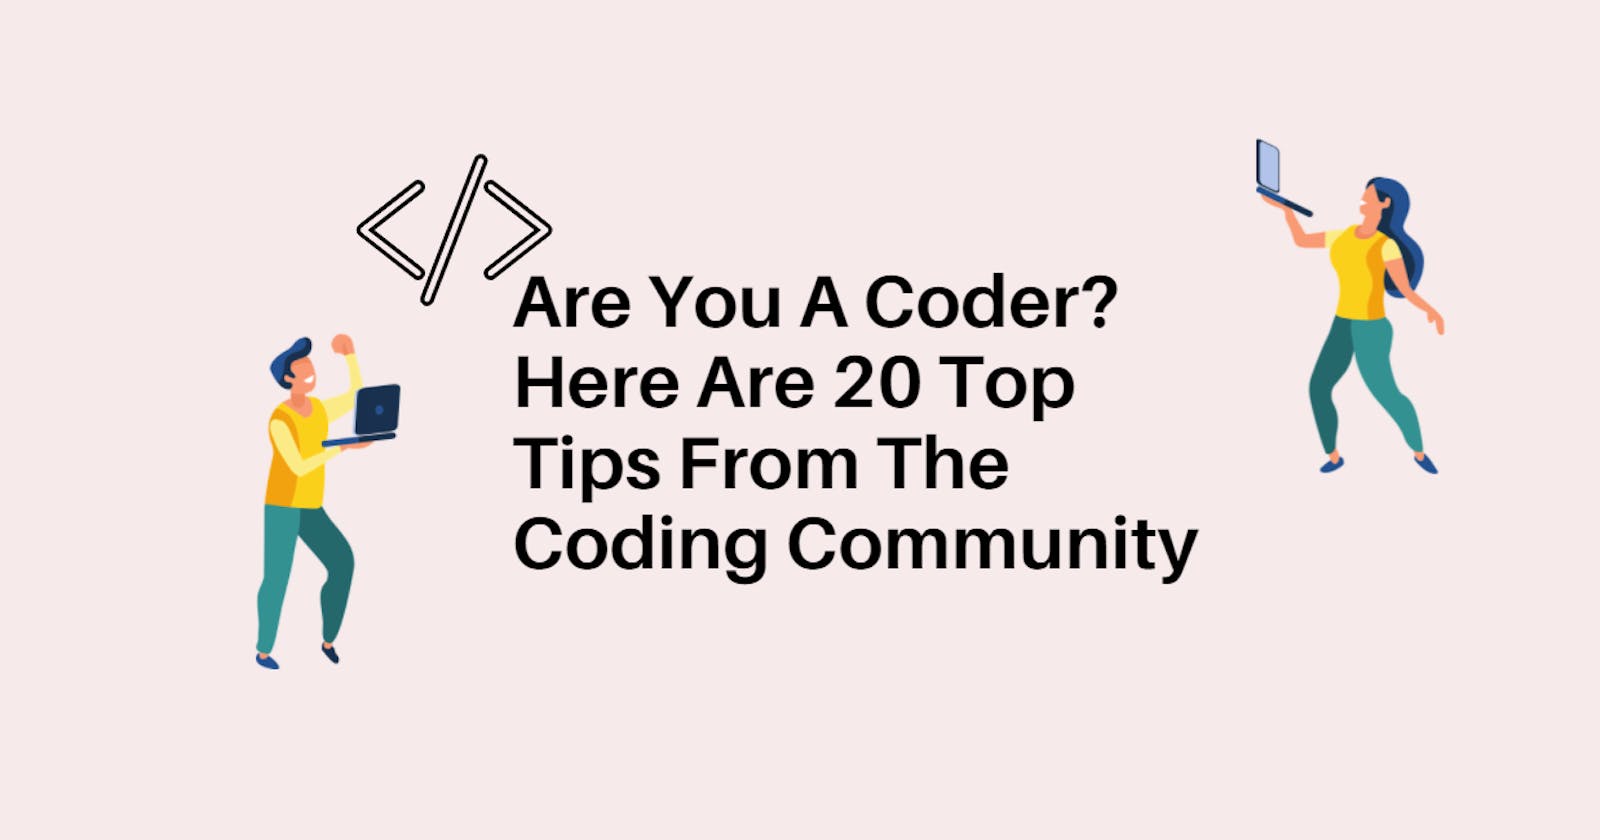 Are You A Coder? Here Are 20 Top Tips From The Coding Community